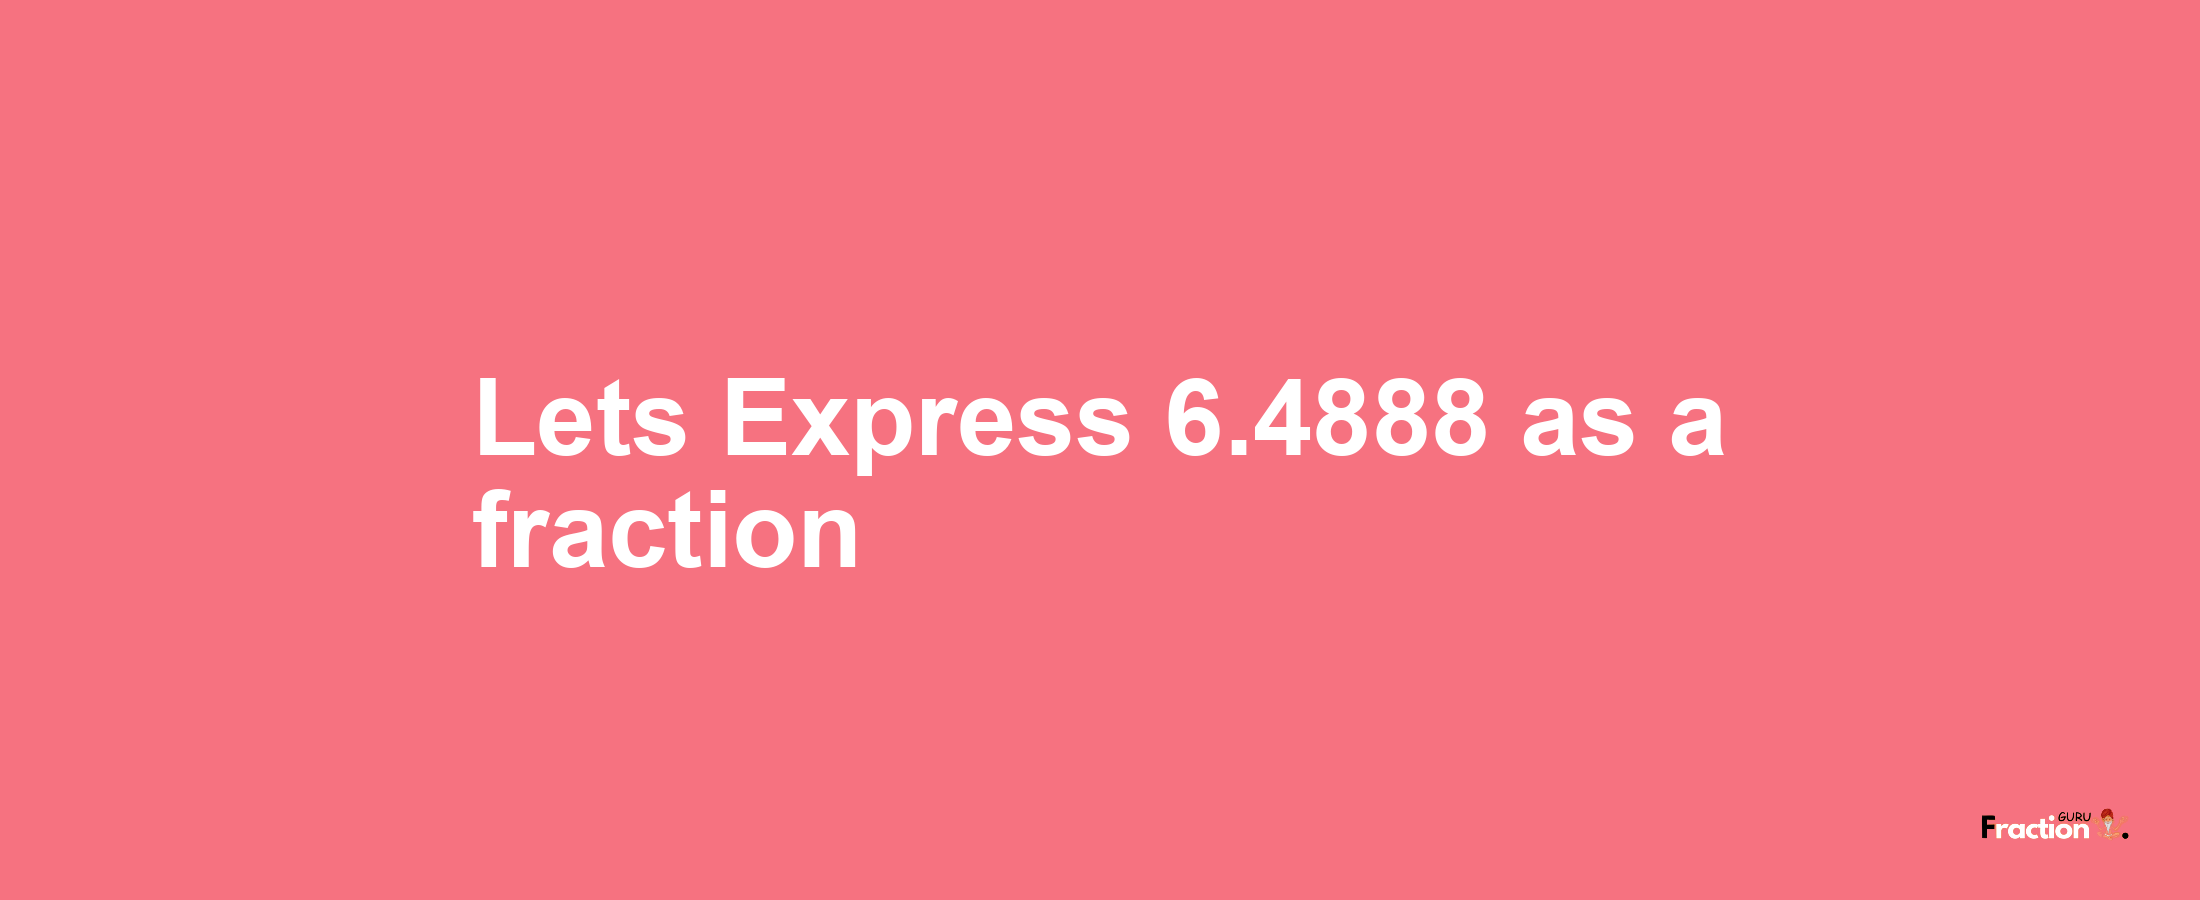 Lets Express 6.4888 as afraction